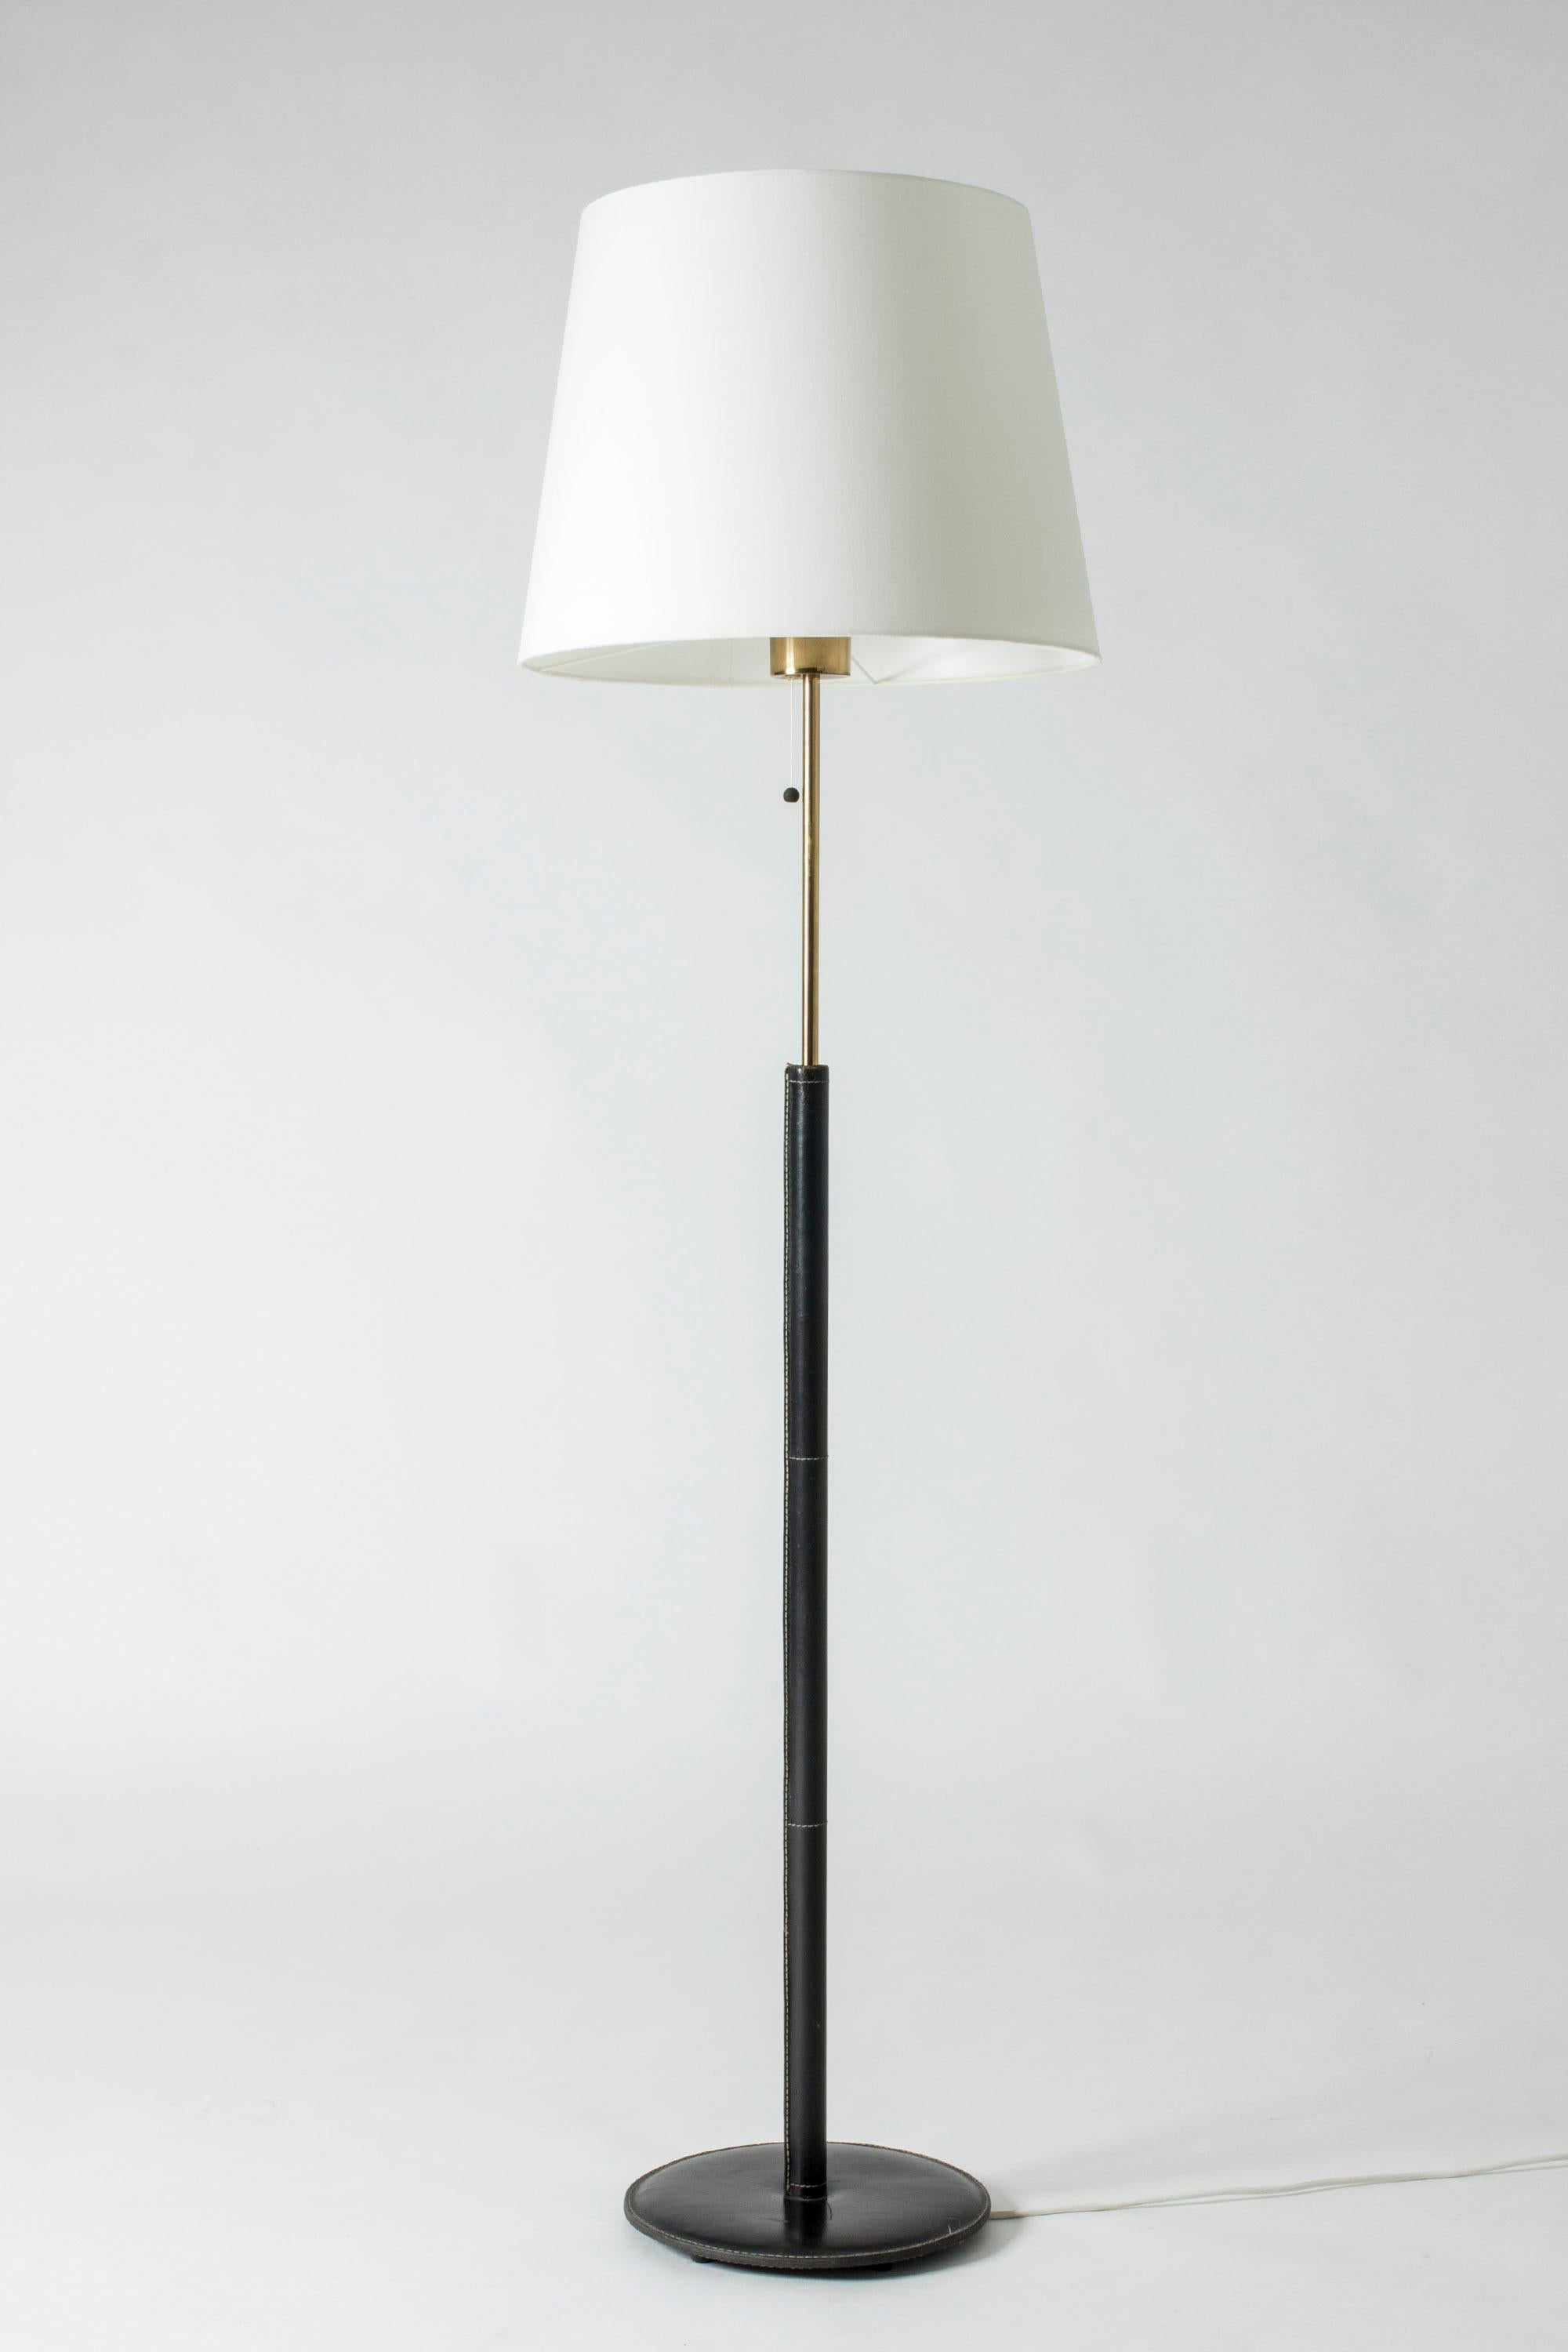 Cool floor lamp from Bergboms with a leather-clad brass pole and foot. Black leather with contrasting white seams.

Bergboms was a successful Swedish lighting firm which manufactured both own designs and those of international designers such as